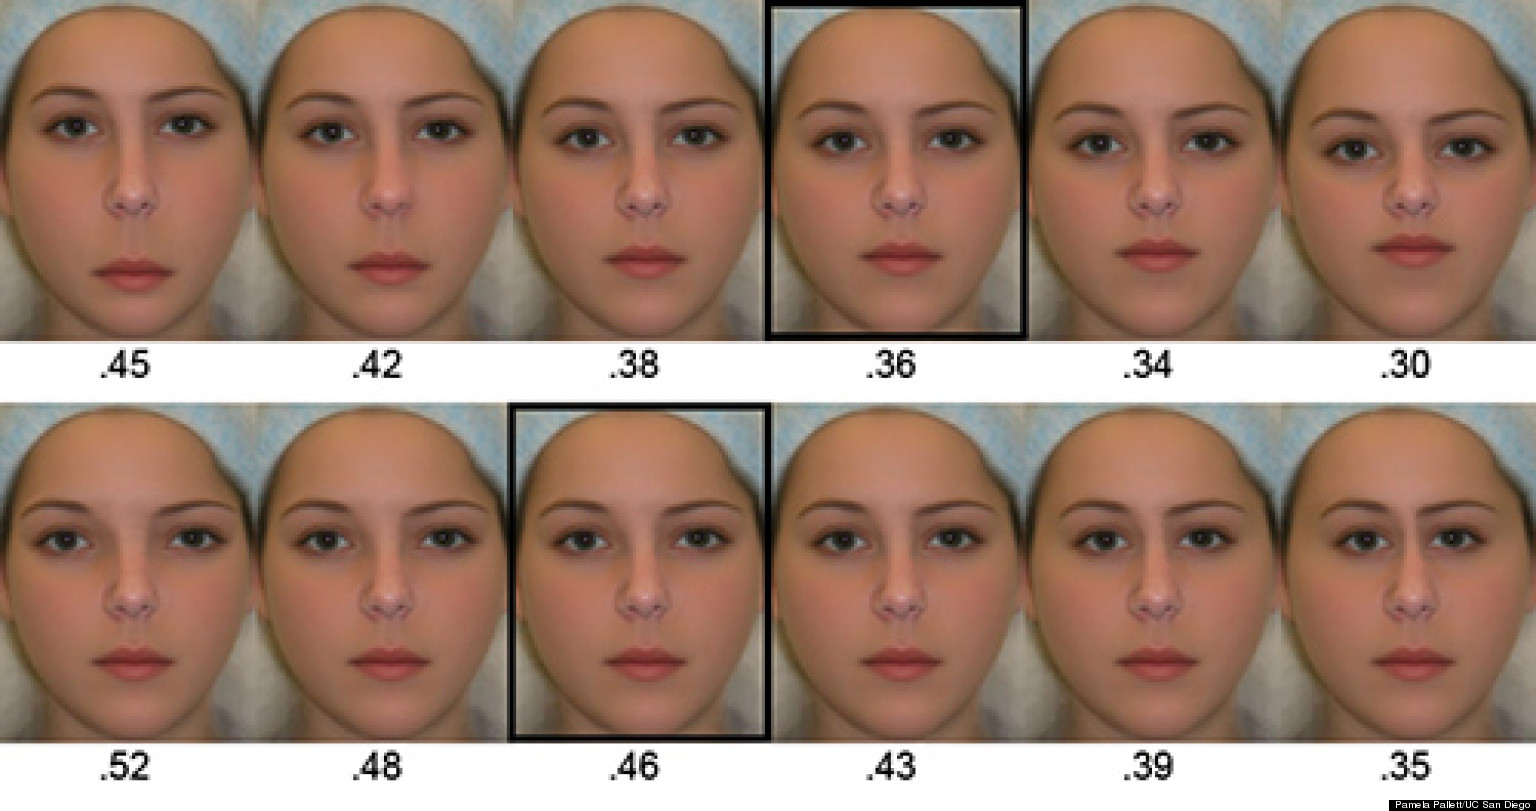 Science Of Beauty 4 Physical Traits That Help Define Female Facial Attractiveness Video